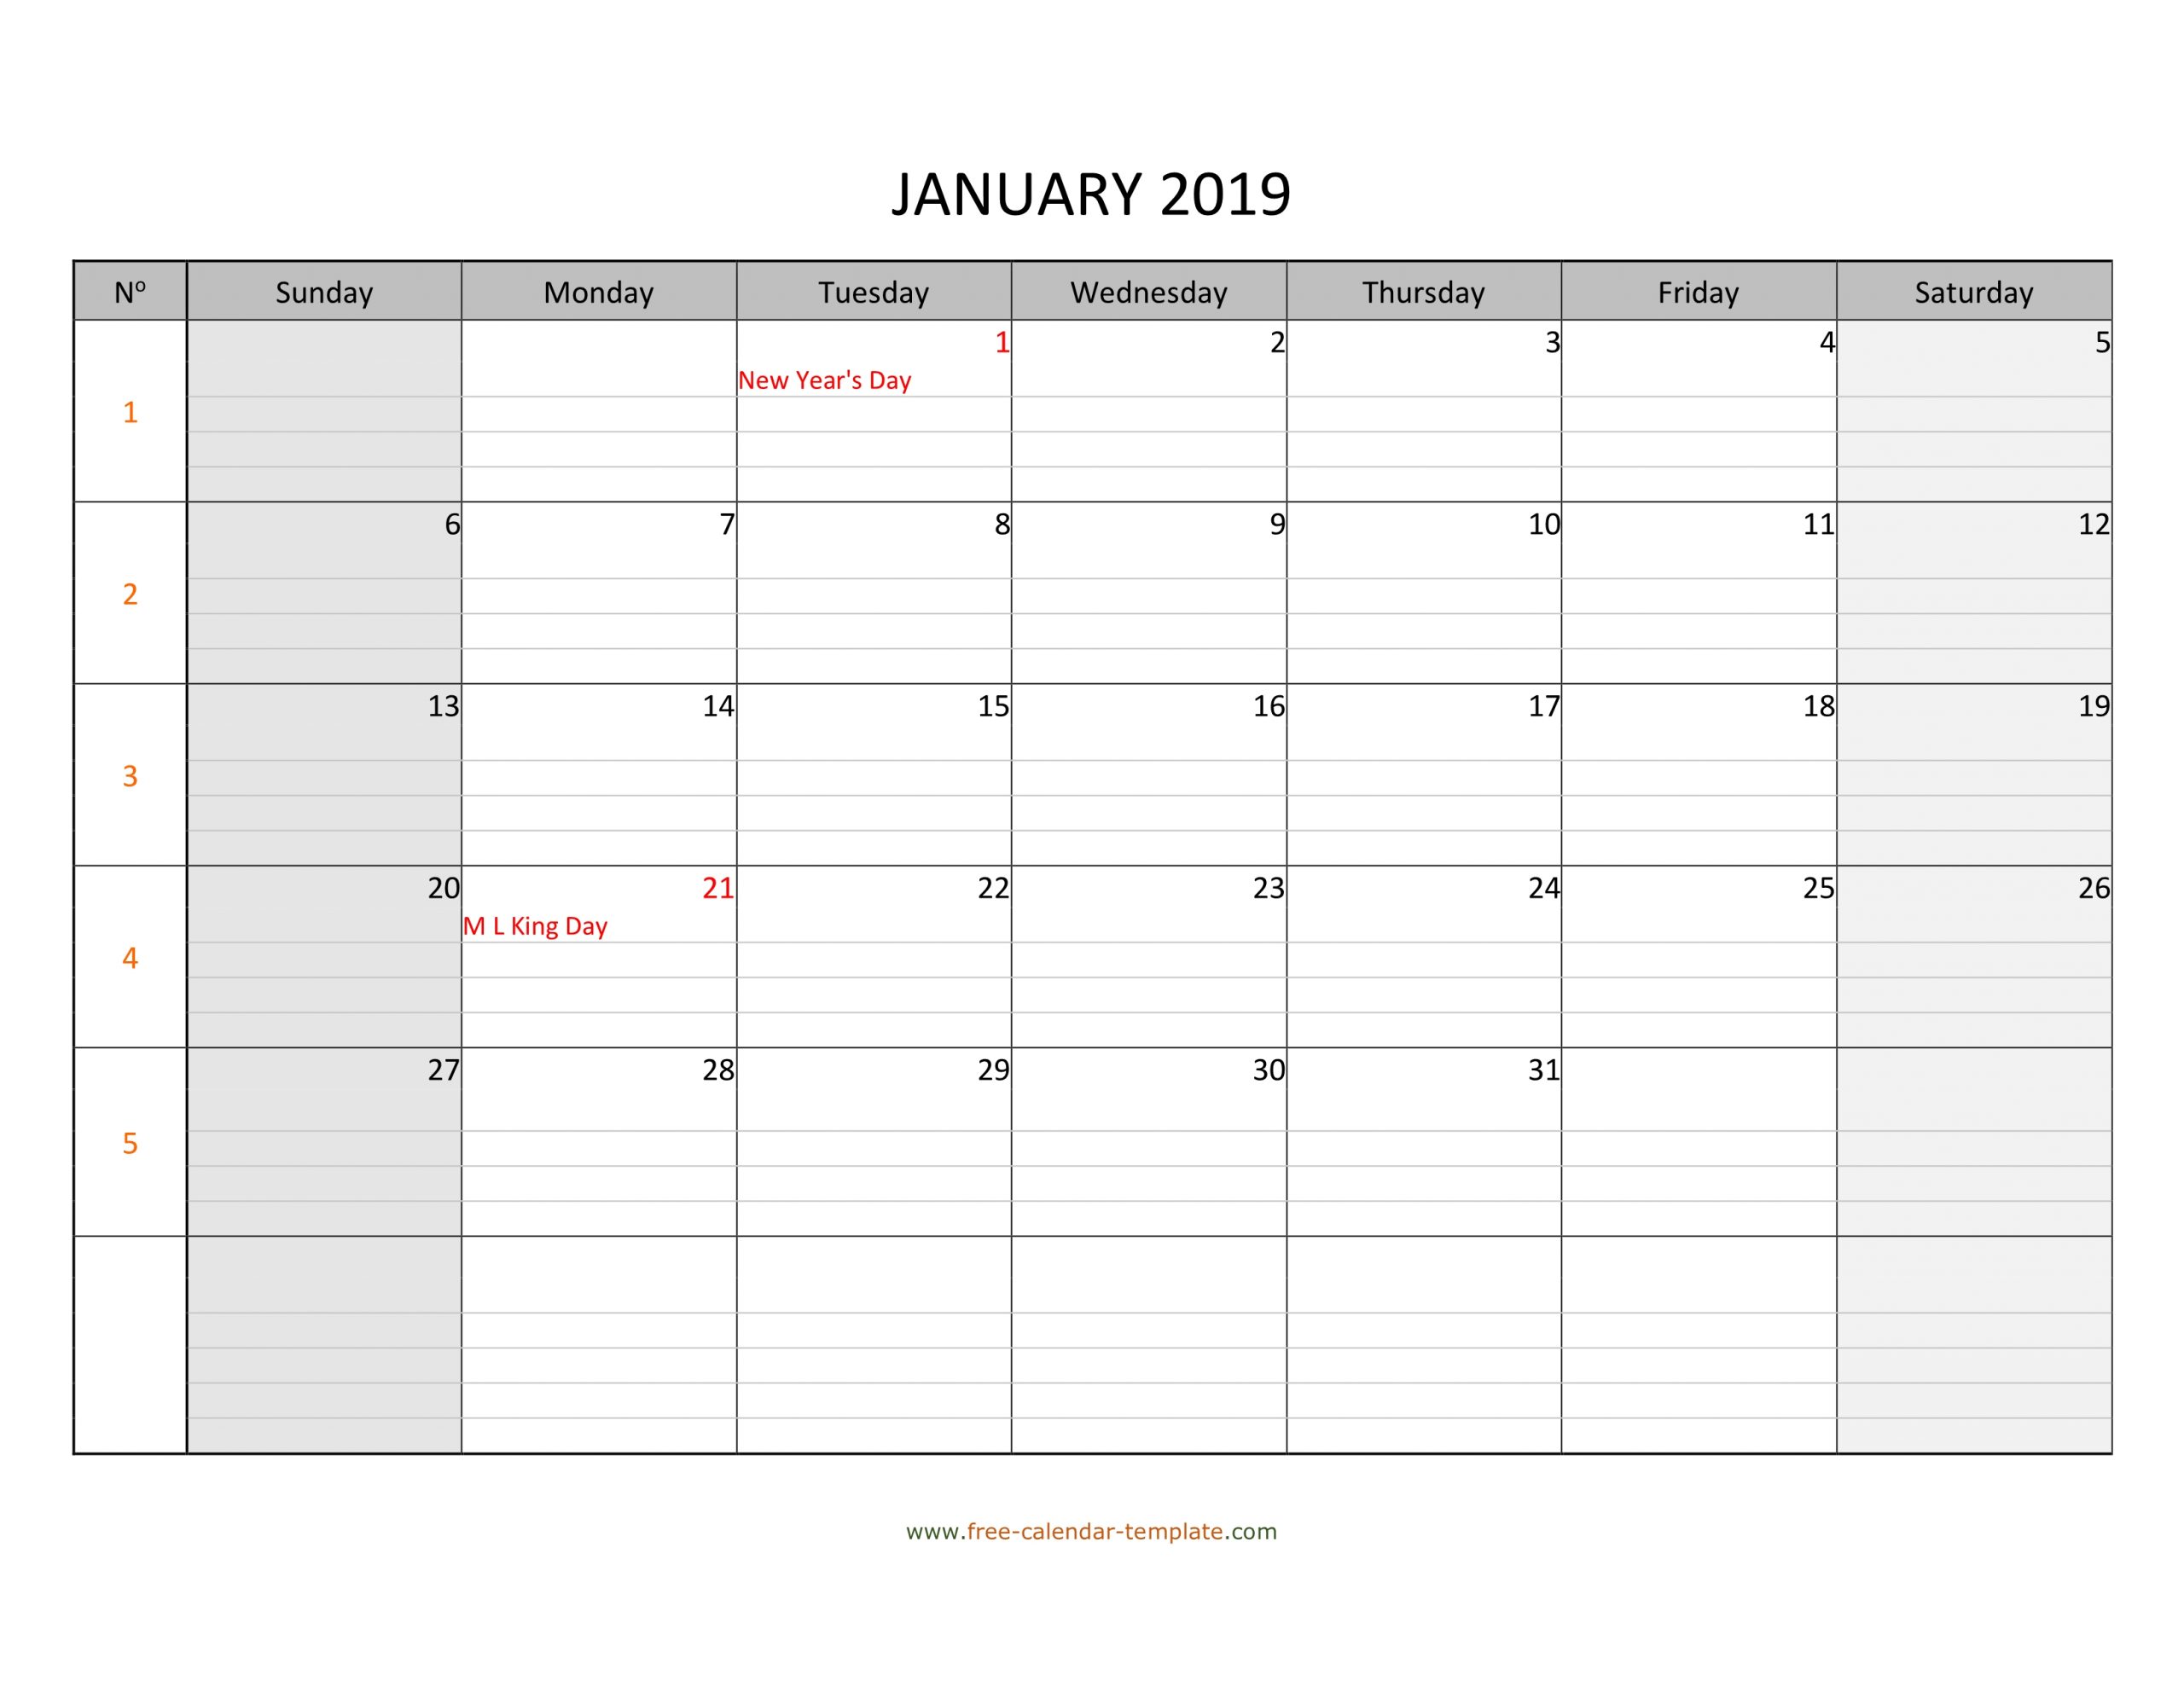 Monthly Calandar Template Start From Sunday Example 1